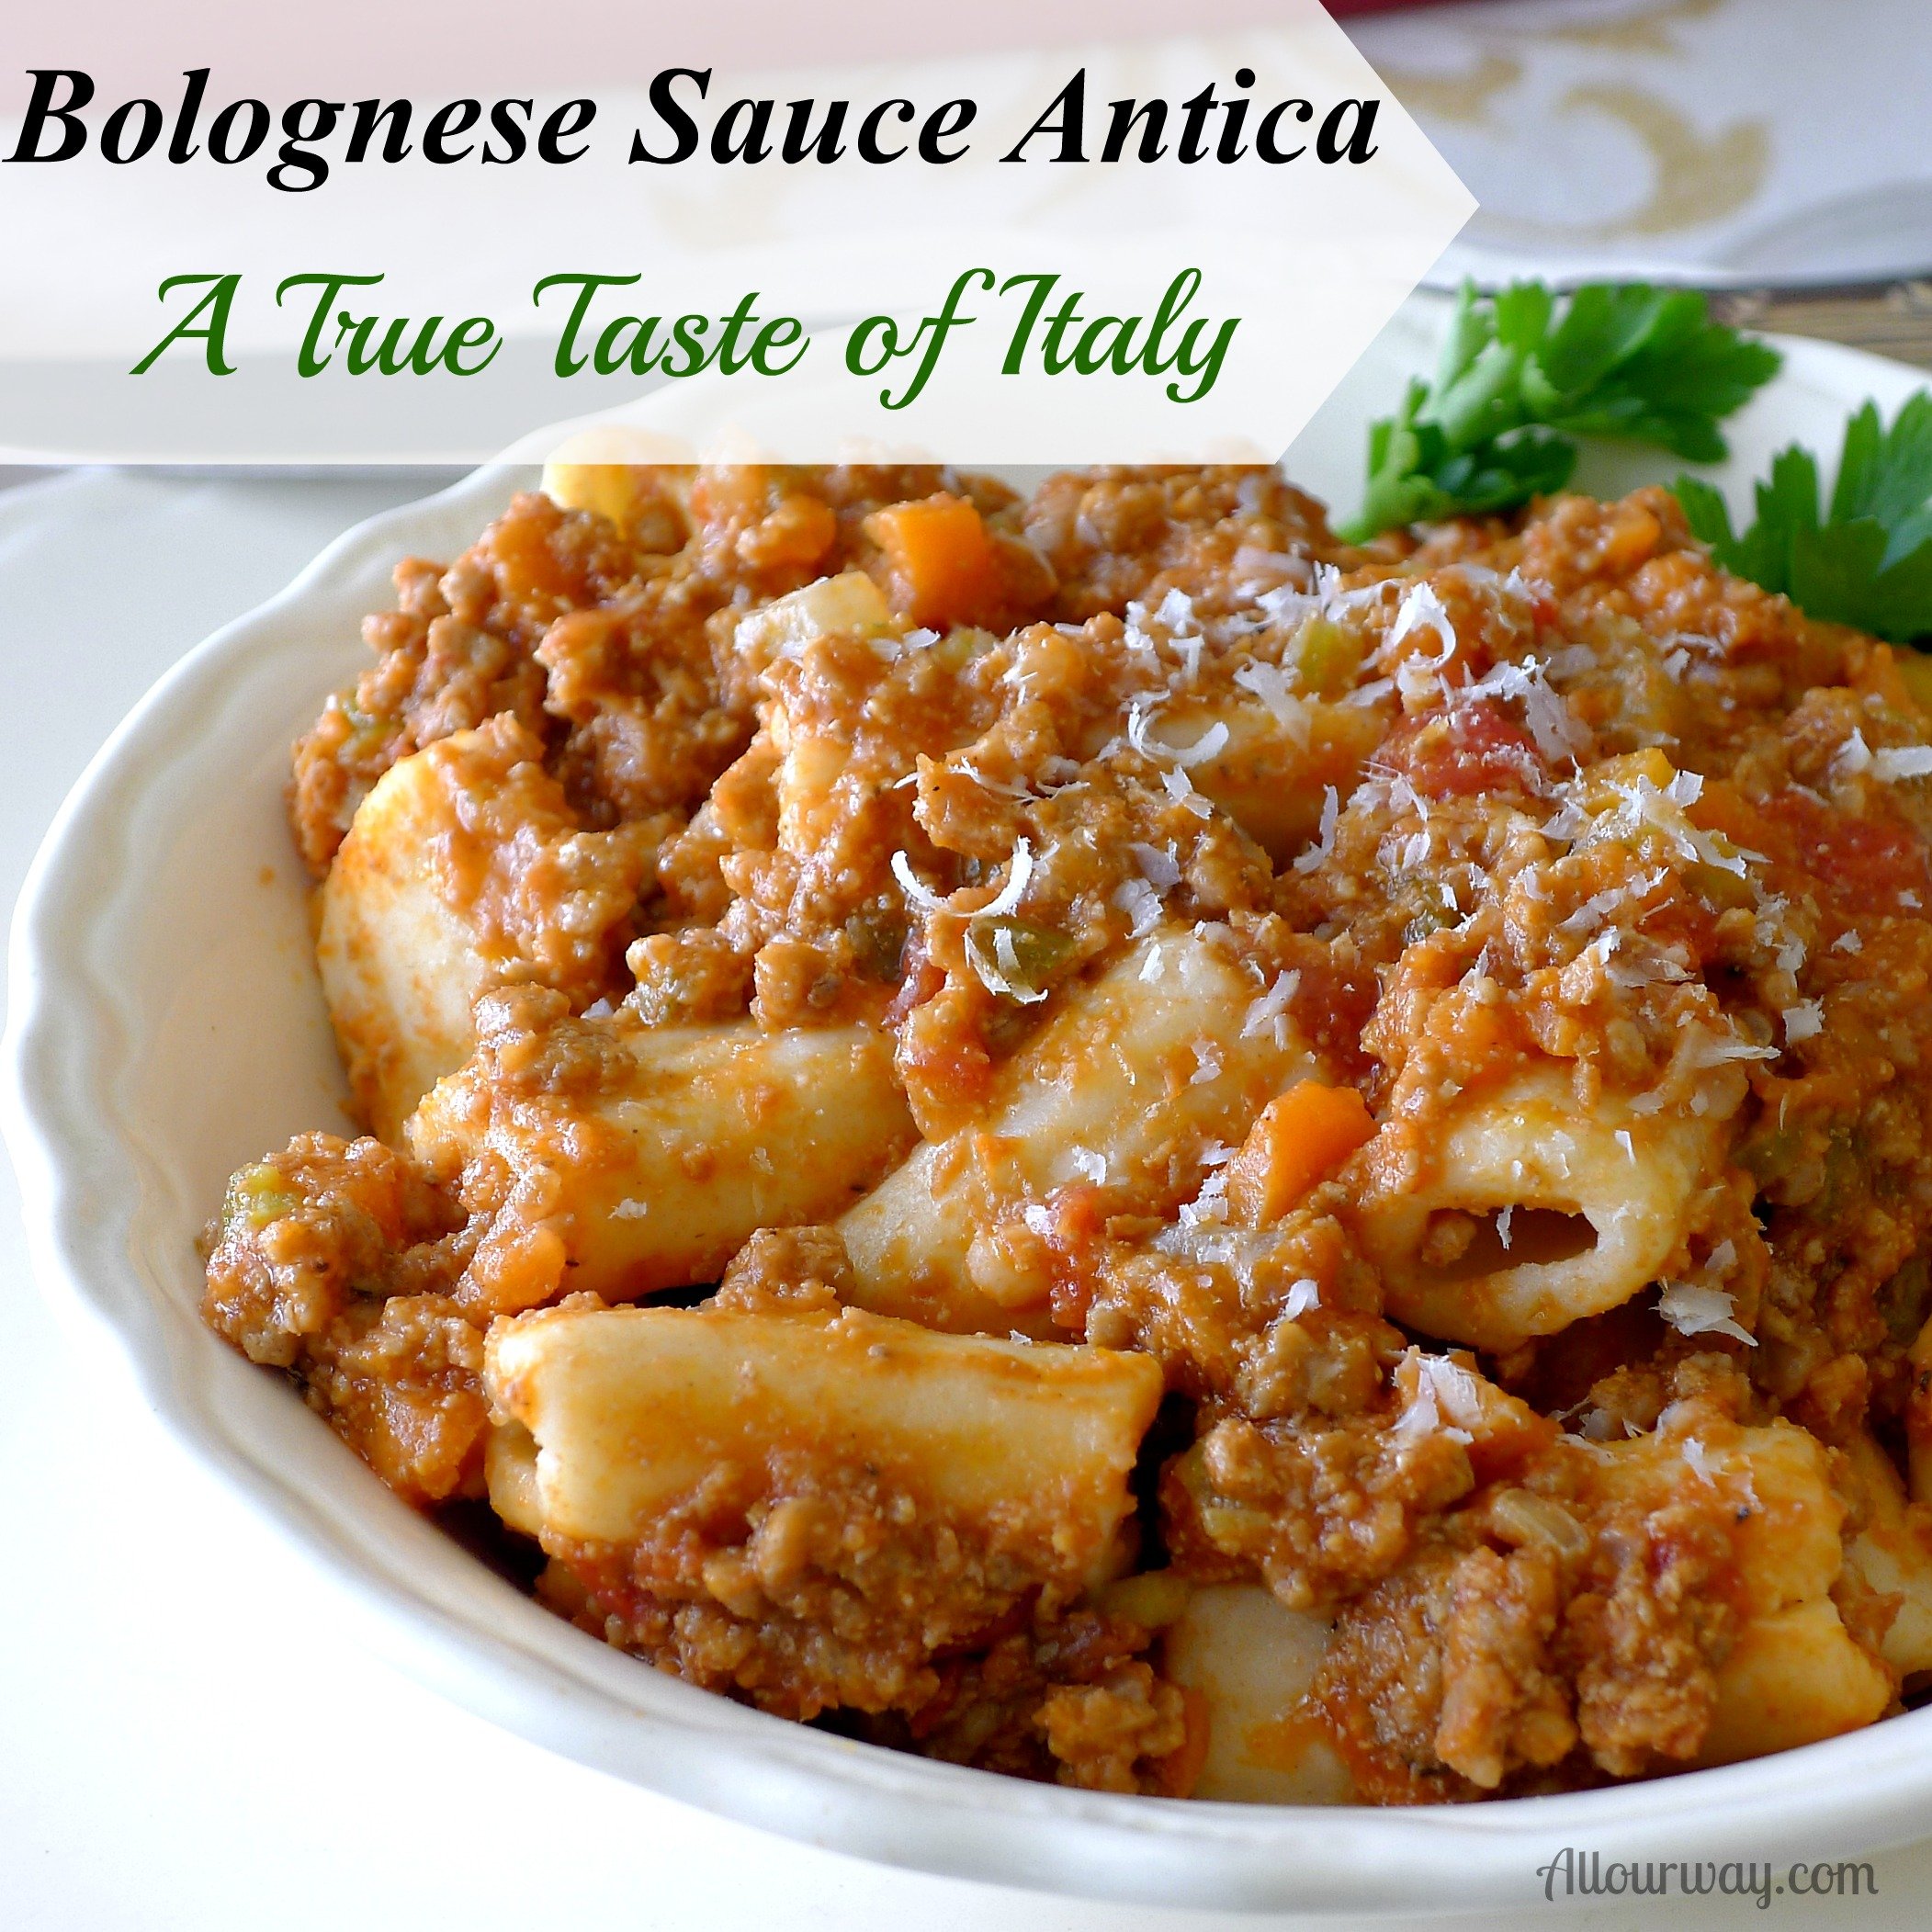 Bolognese Sauce Antica is a wonderful meat sauce that is simmered for hours resulting in a rich meaty sauce @allourway.com